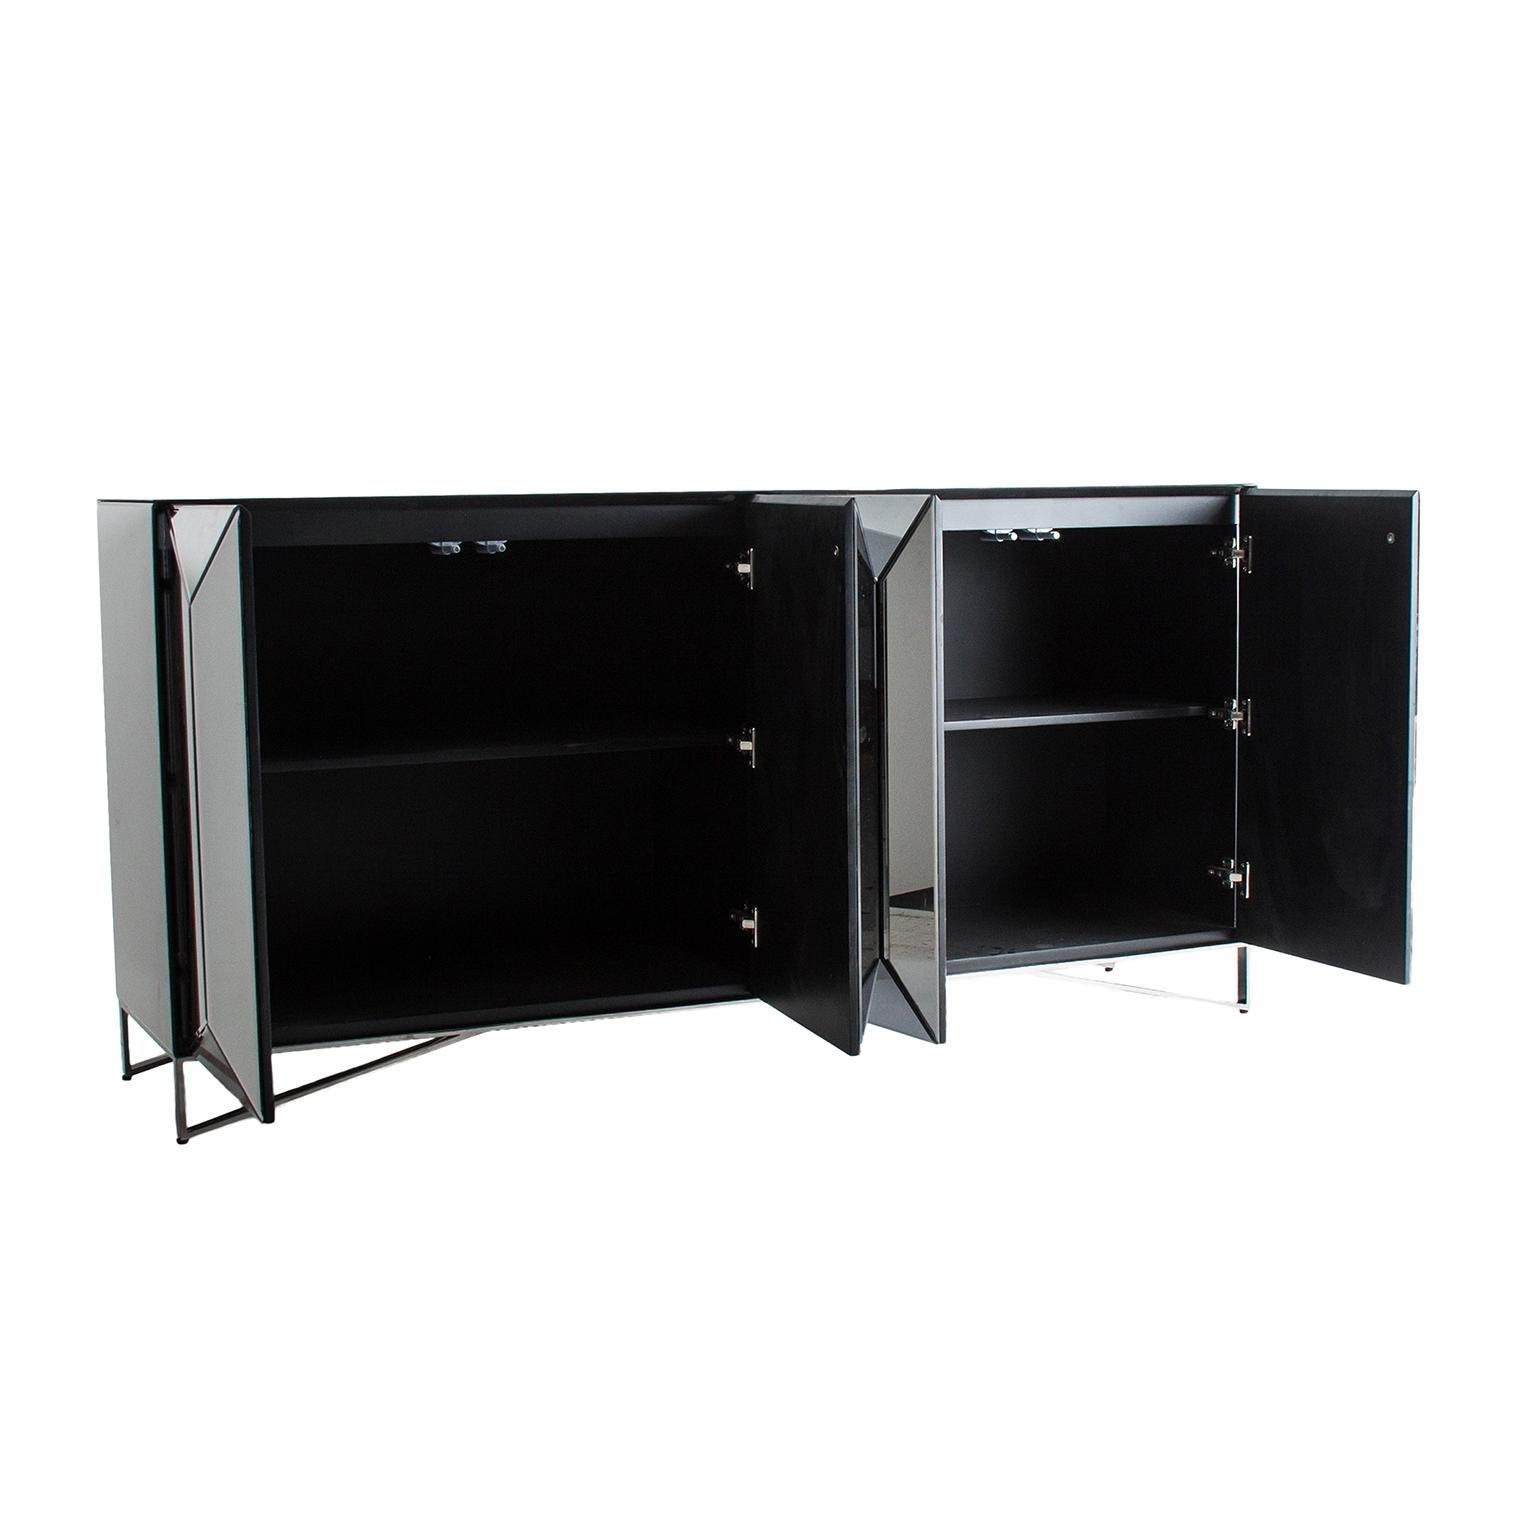 Sparkling and sophisticated mirrored sideboard with chrome feet four mirrored graphic panels doors opening on shelves.